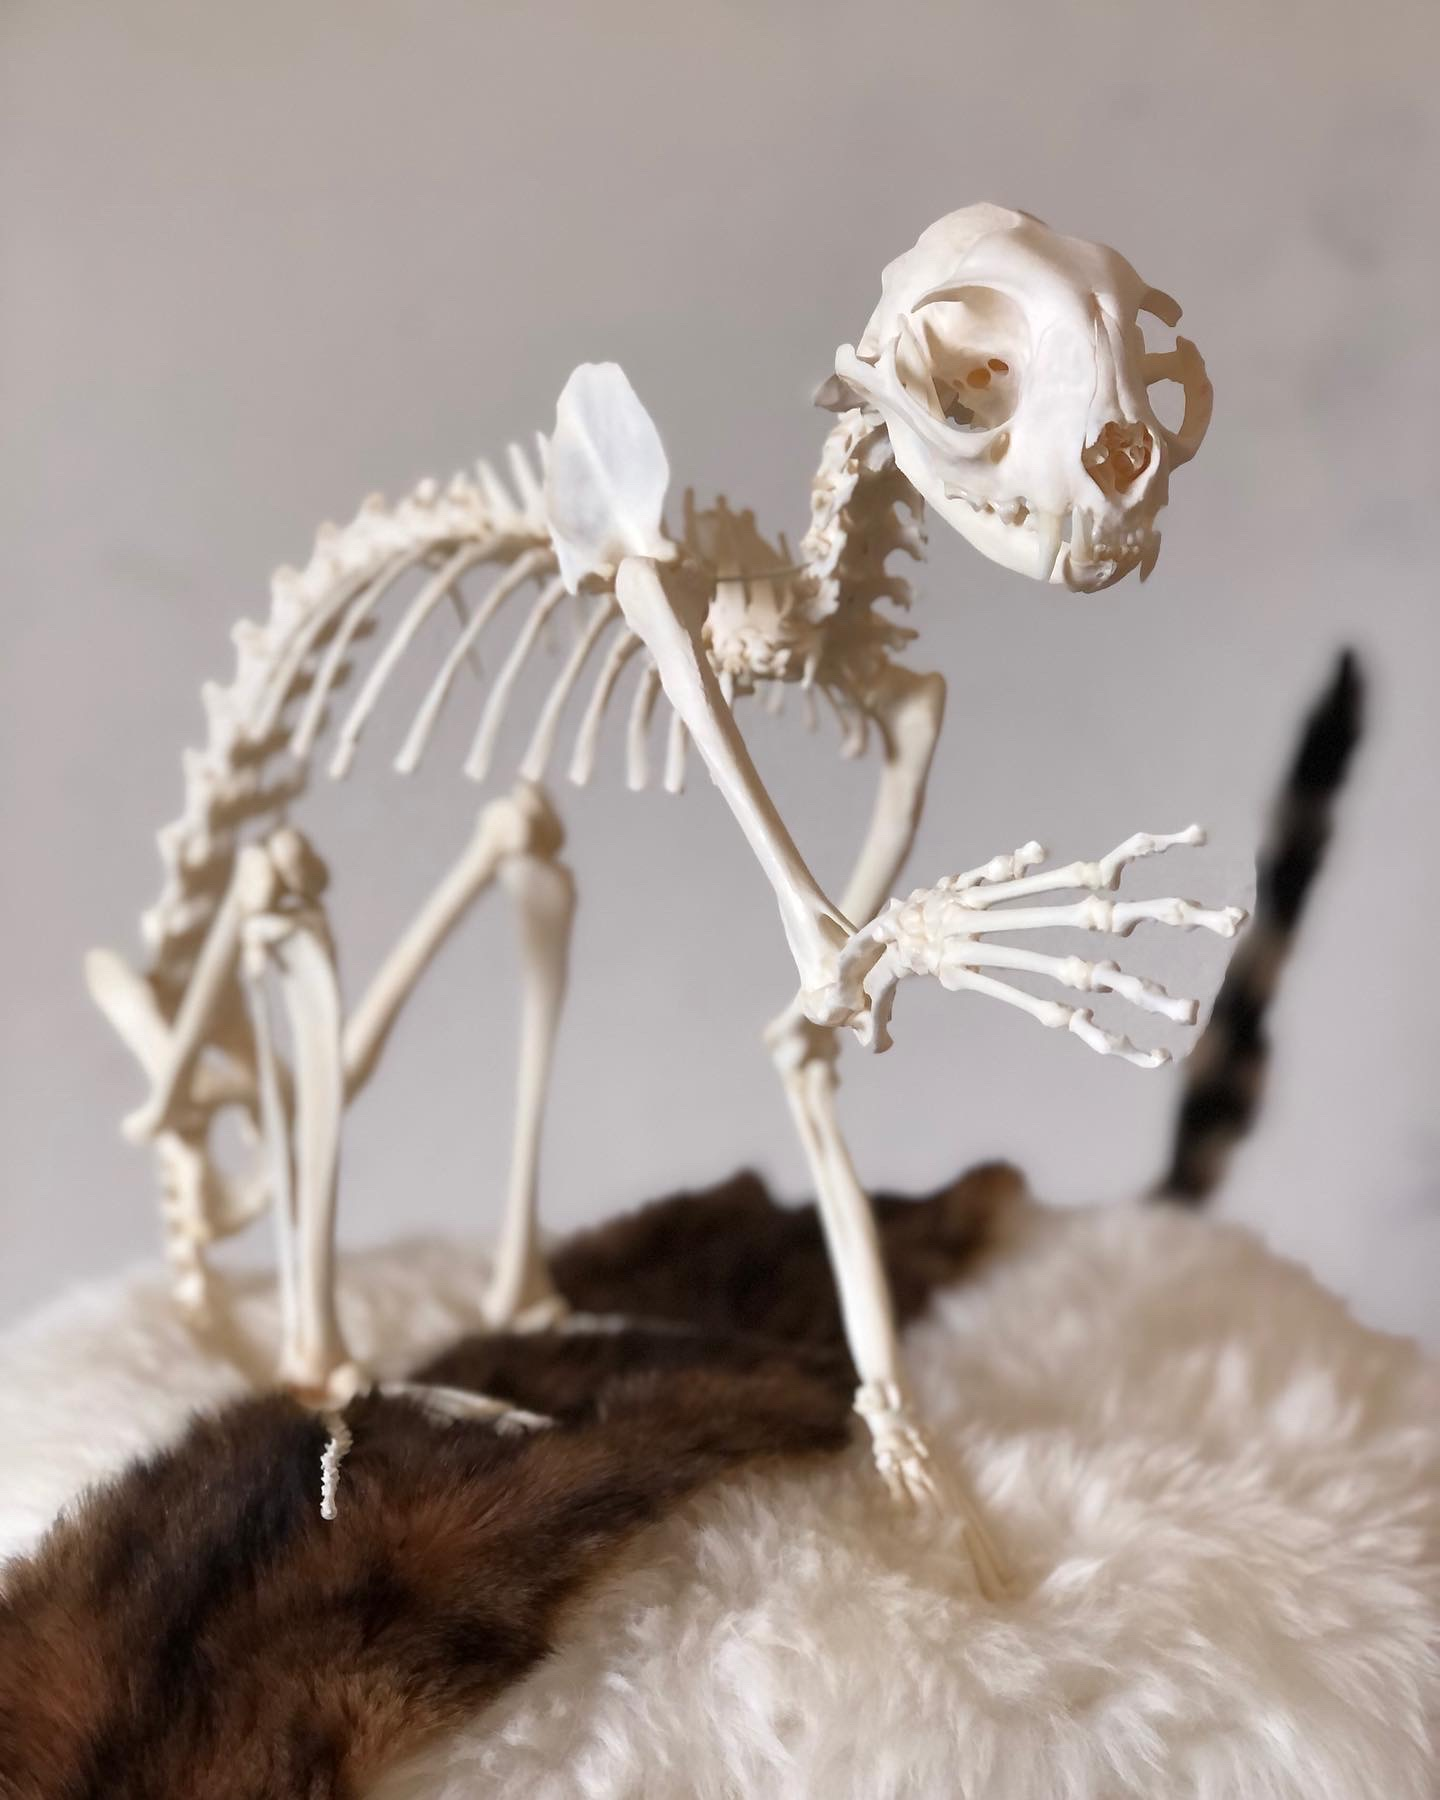 Fully articulated cat skeleton with one paw reaching forward